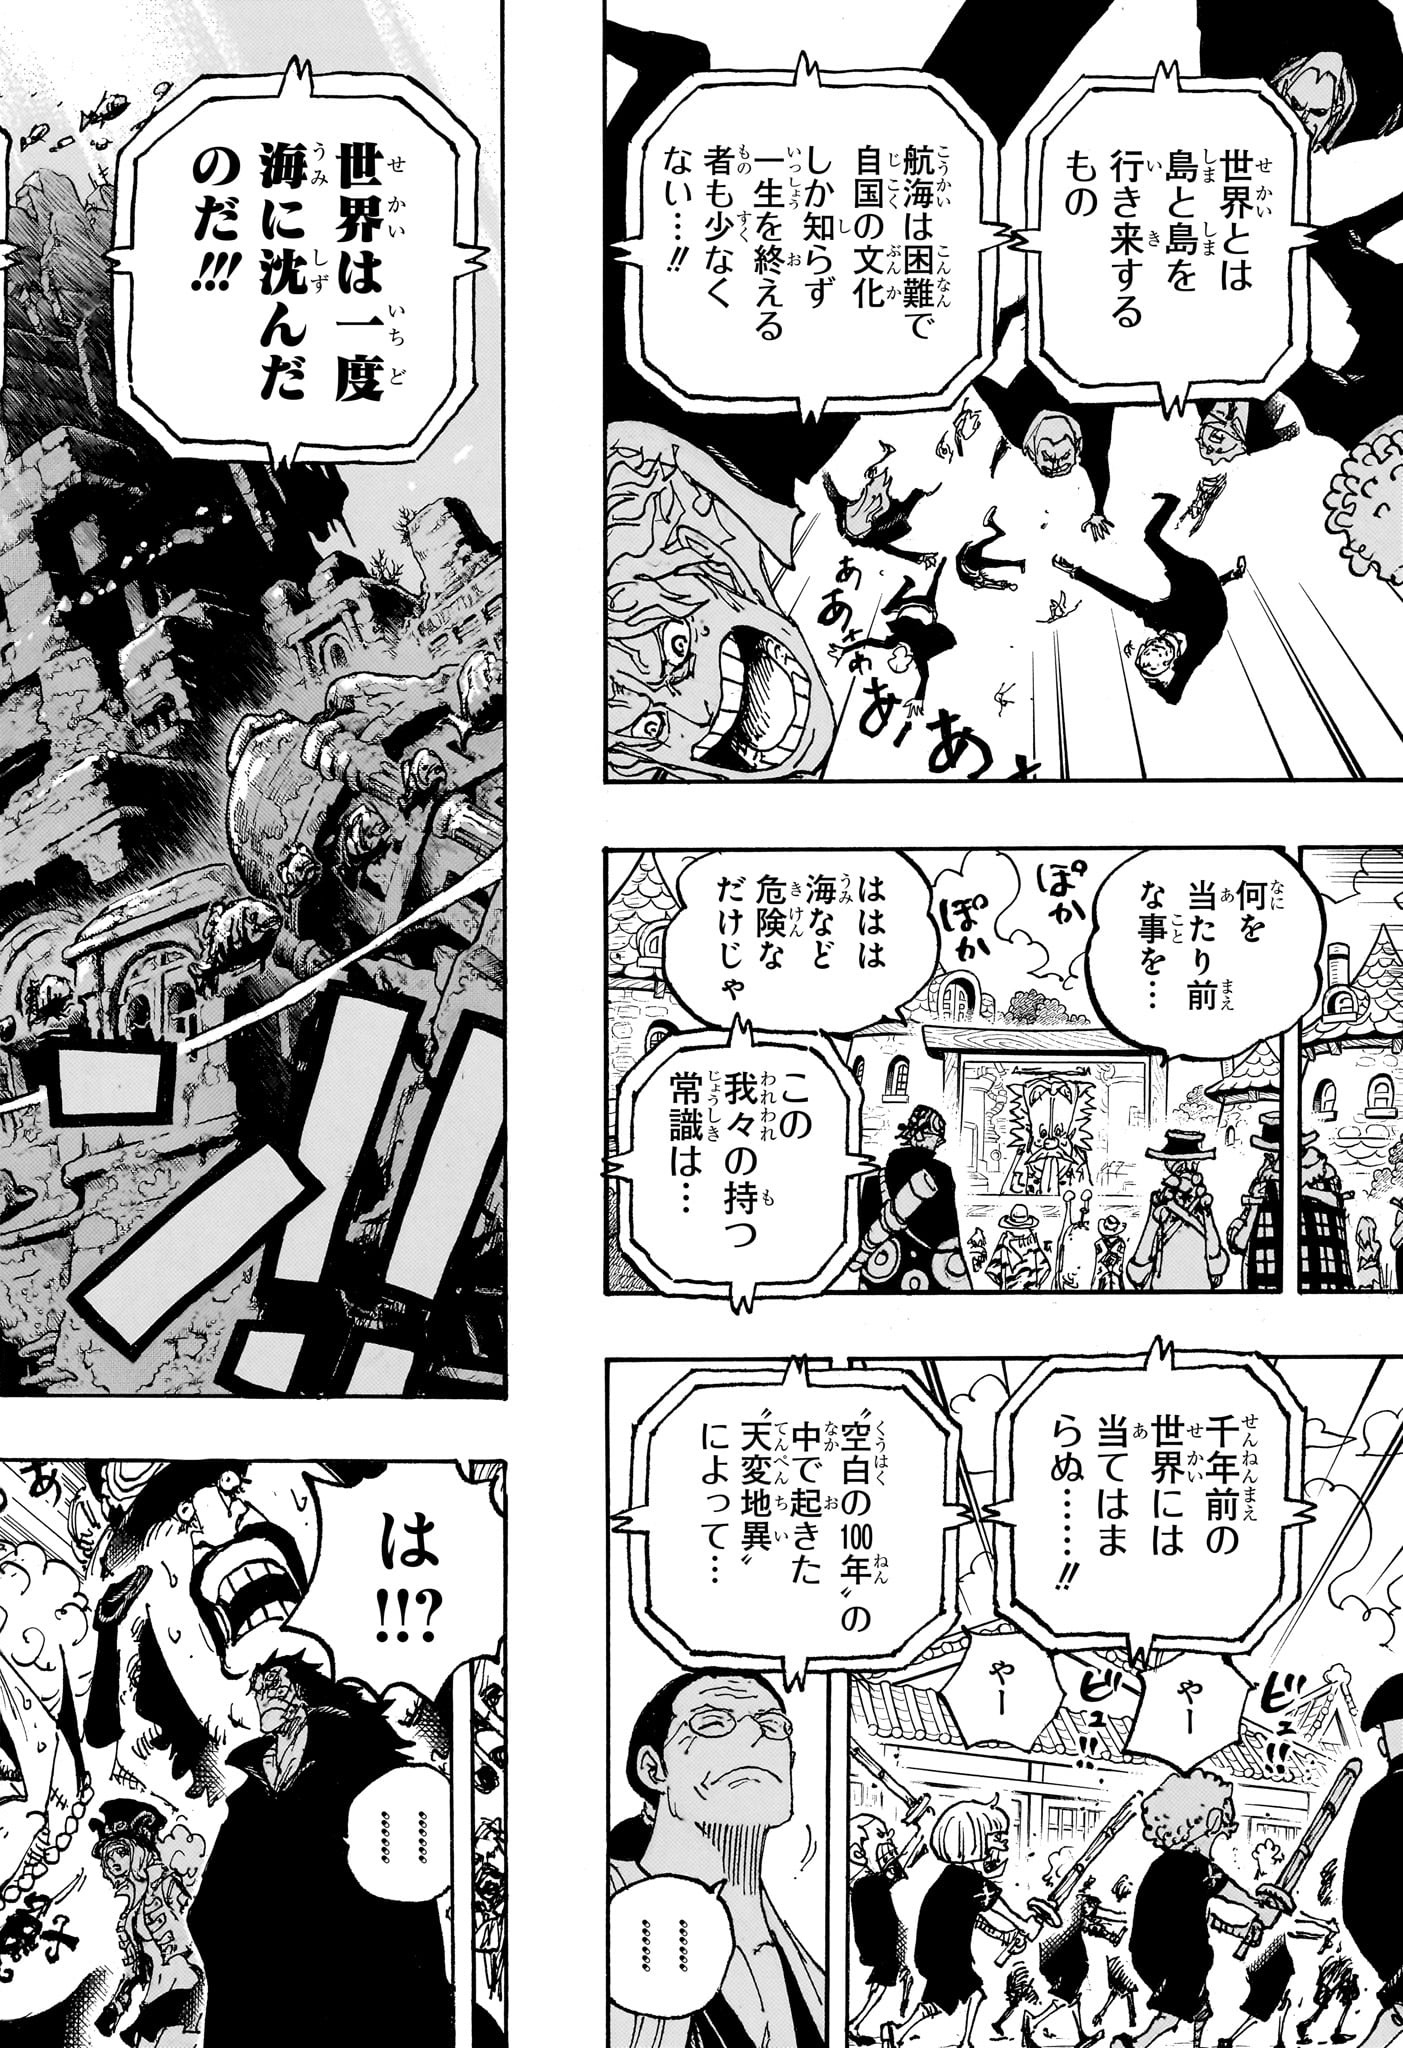 One Piece - Chapter 1115 - Page 12